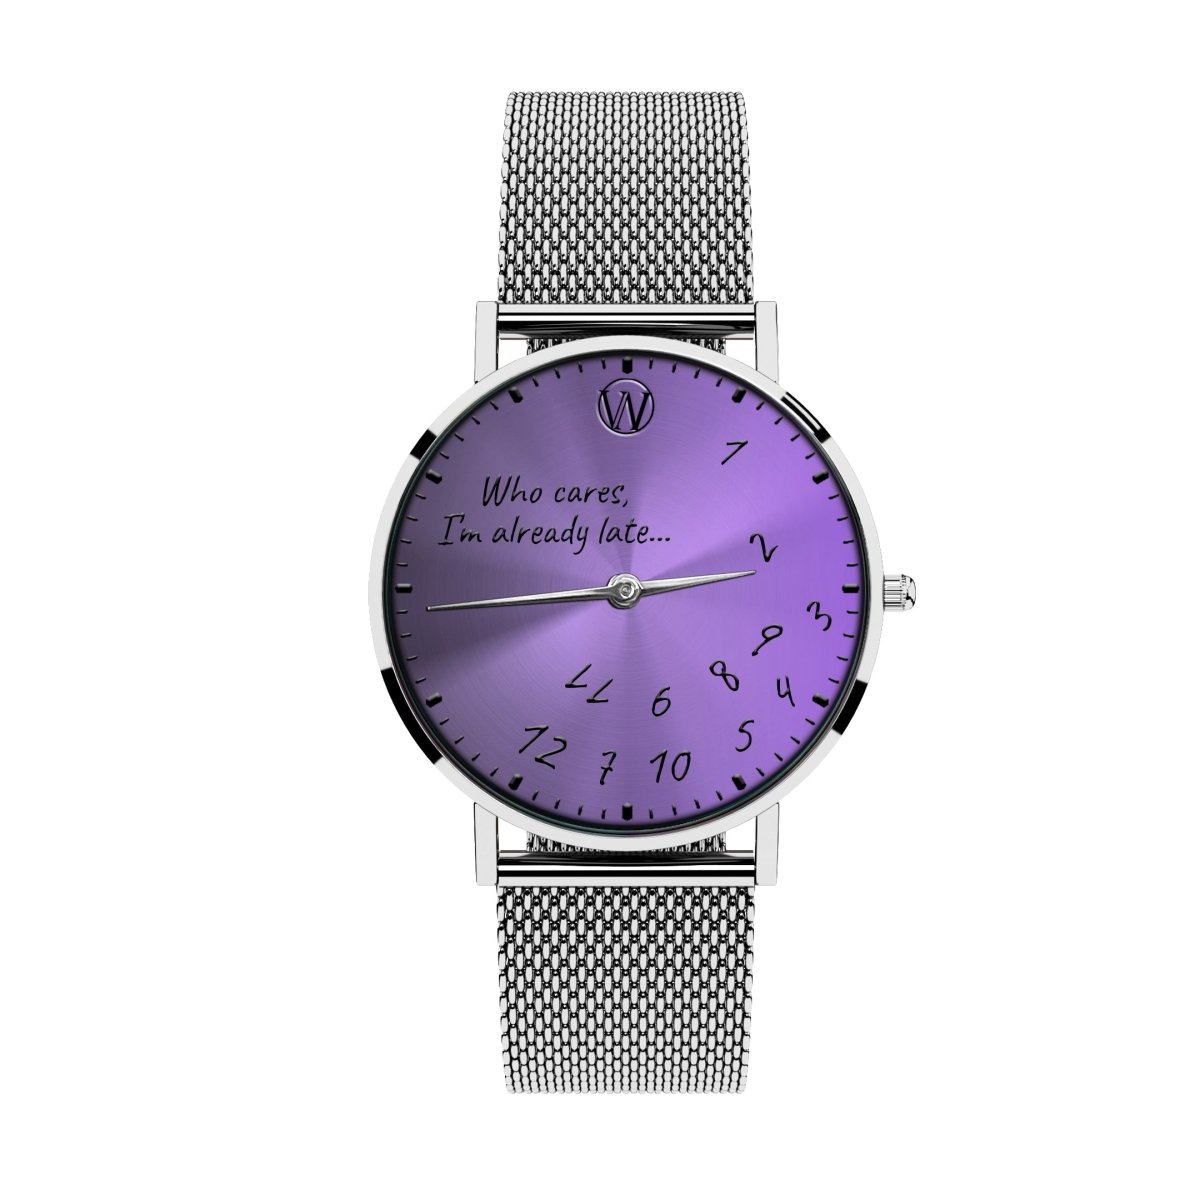 Who cares| 10th anniversary| Lilac Limited Edition - WOODSTOCK ZAMBON